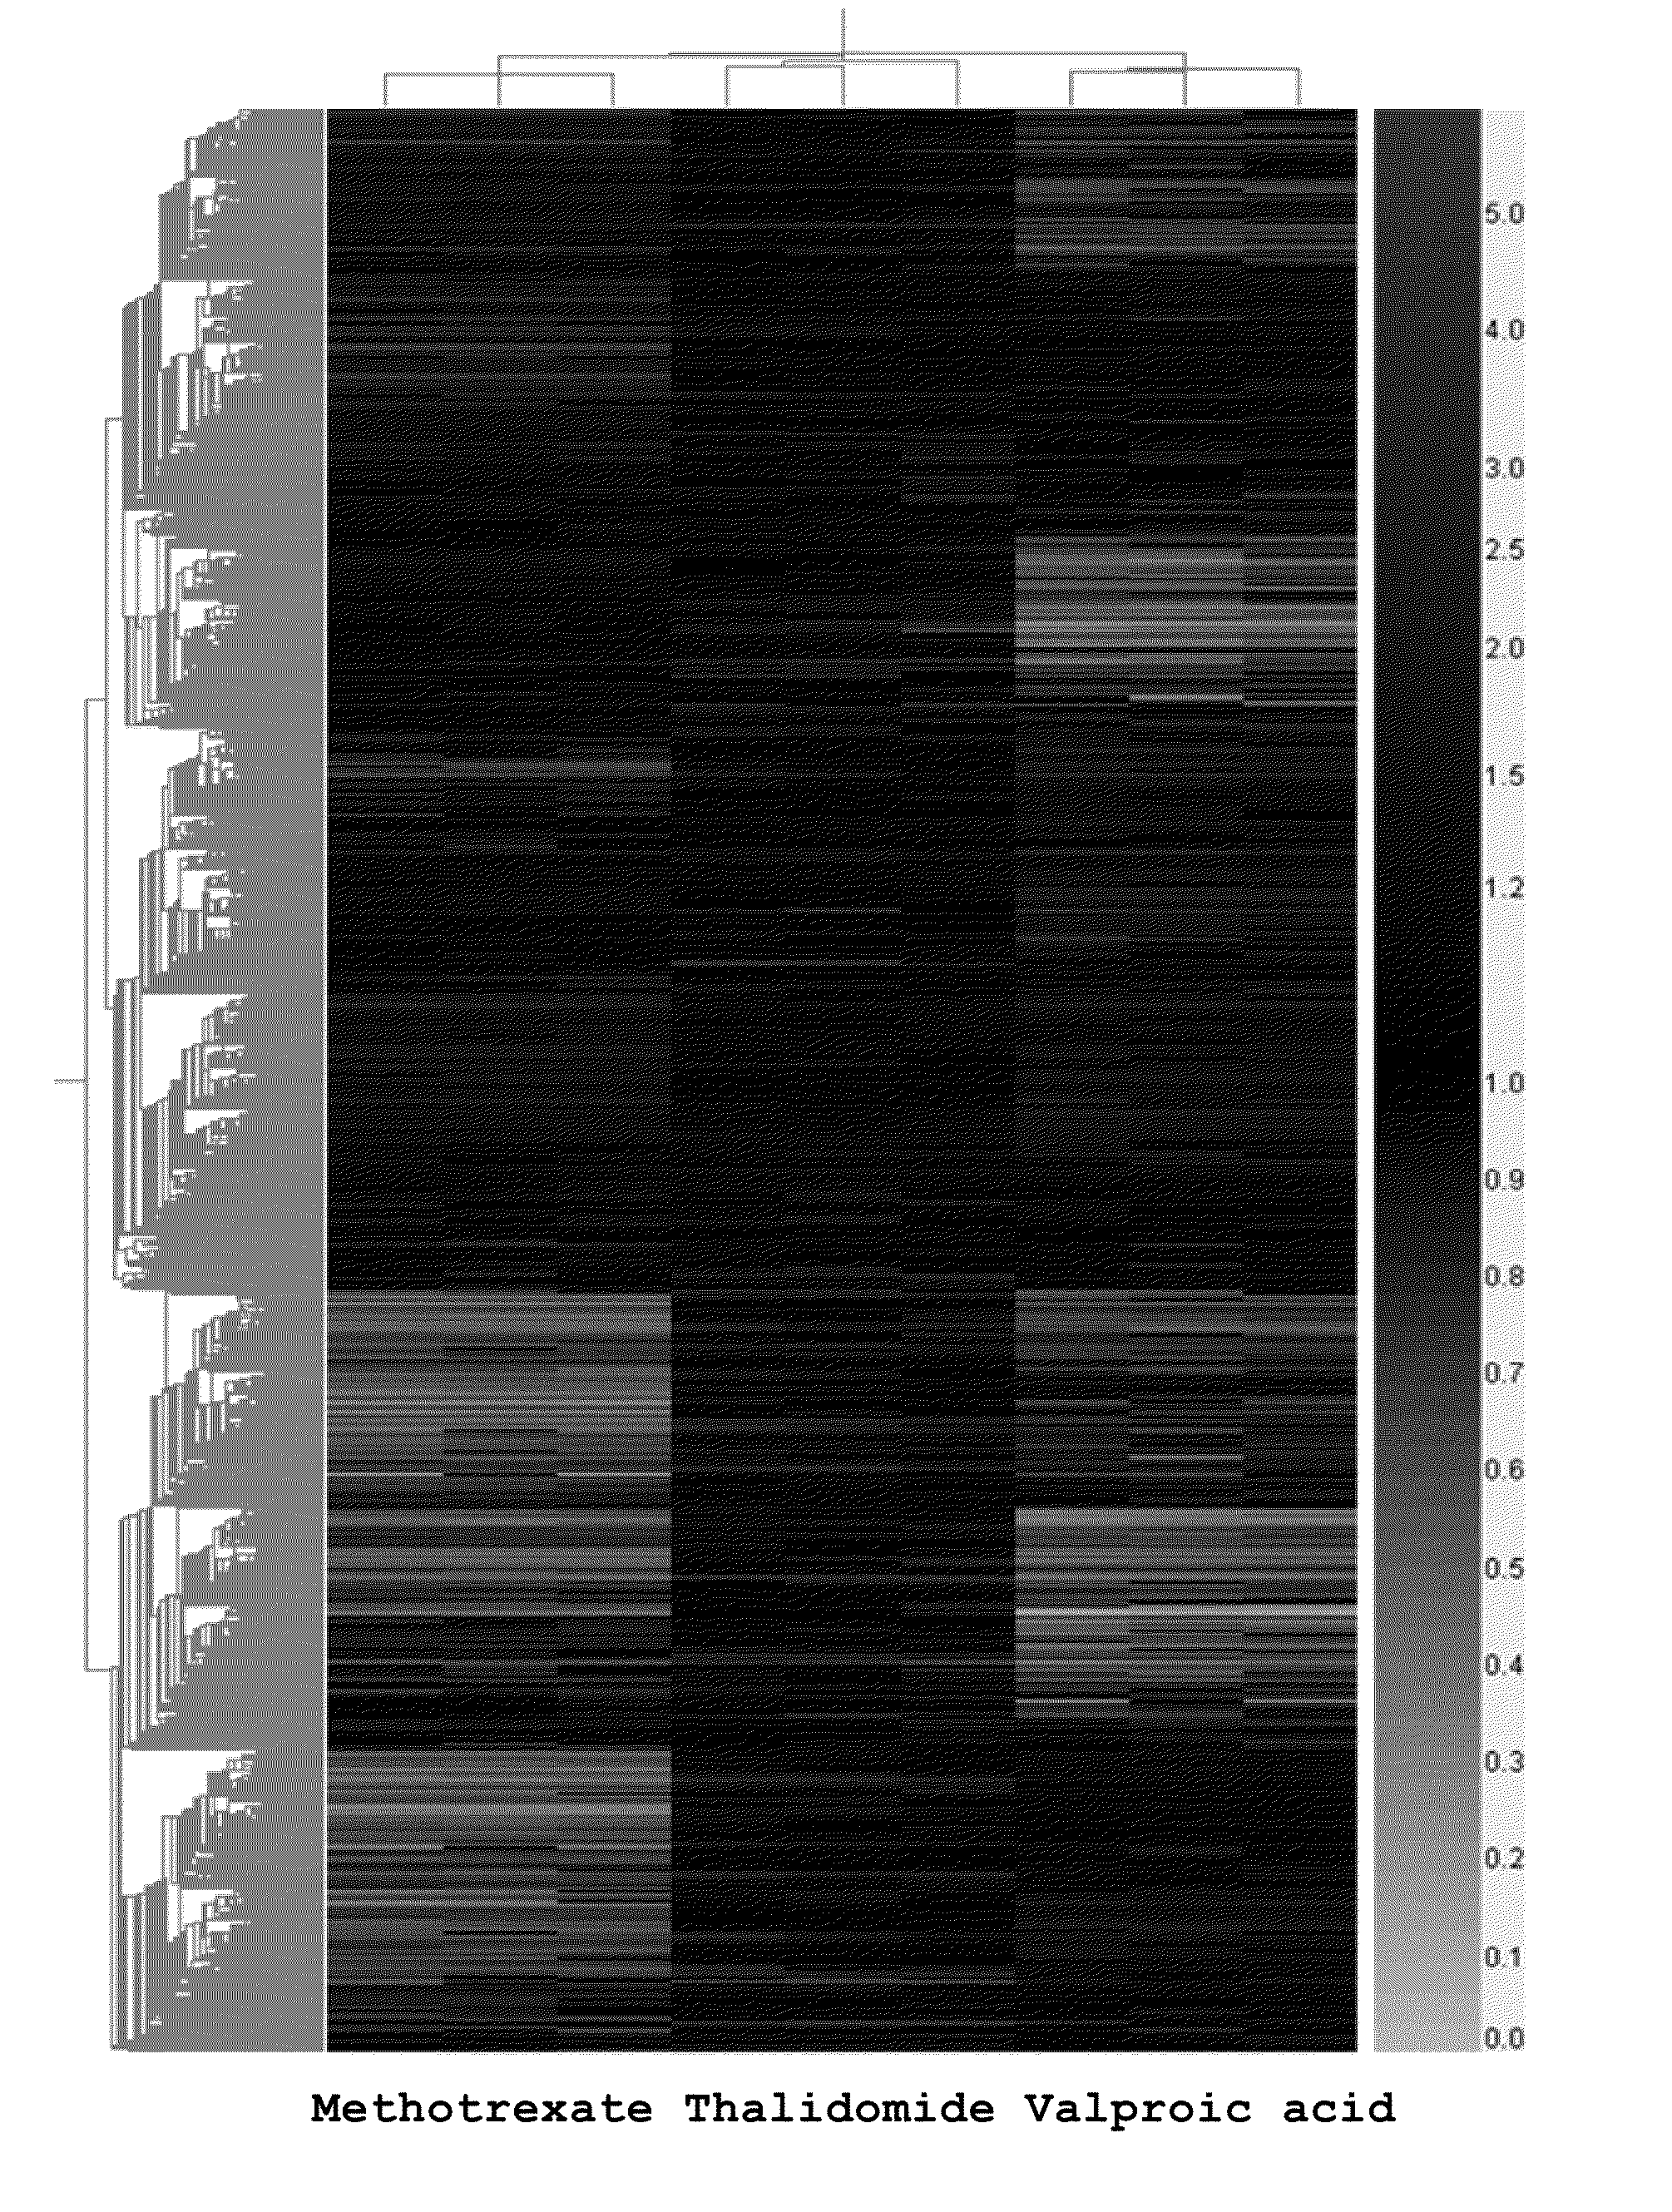 Genes Based on Thalidomide, Valproic Acid and Methotrexate Treatment for Screening of Drug Inducing Teratogenicity and Screening Method Using Thereof